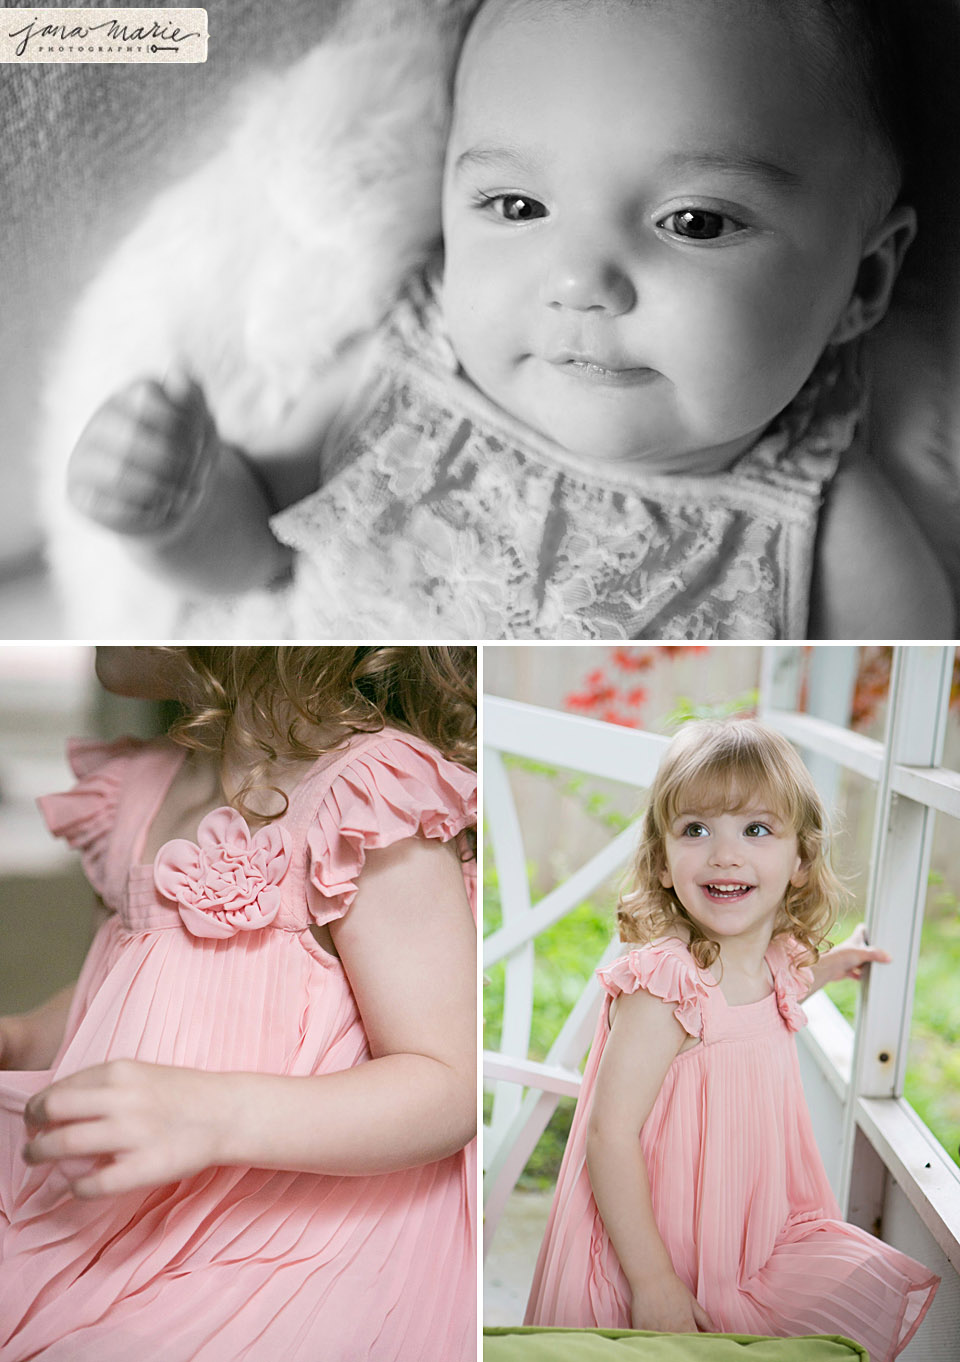 Black and white photography, Jana Marie Photos, Isabella, Pink dresses